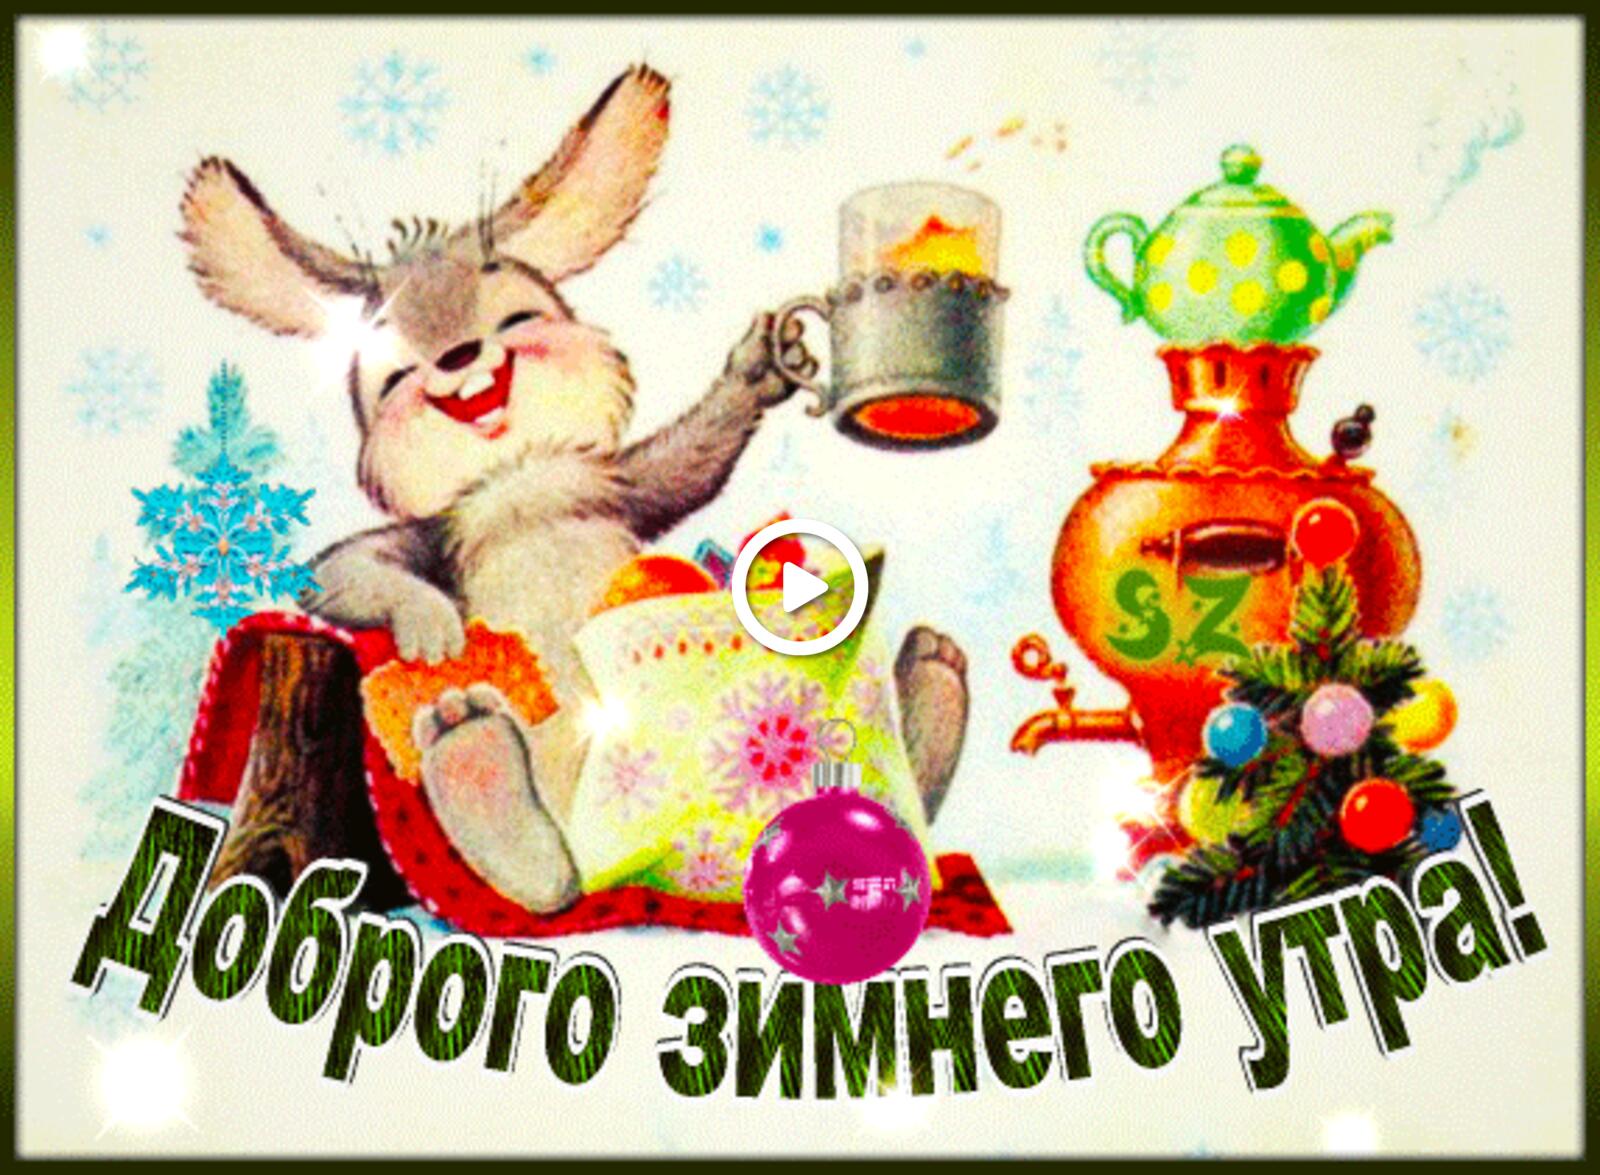 A postcard on the subject of hare tea vintage good morning cards for free